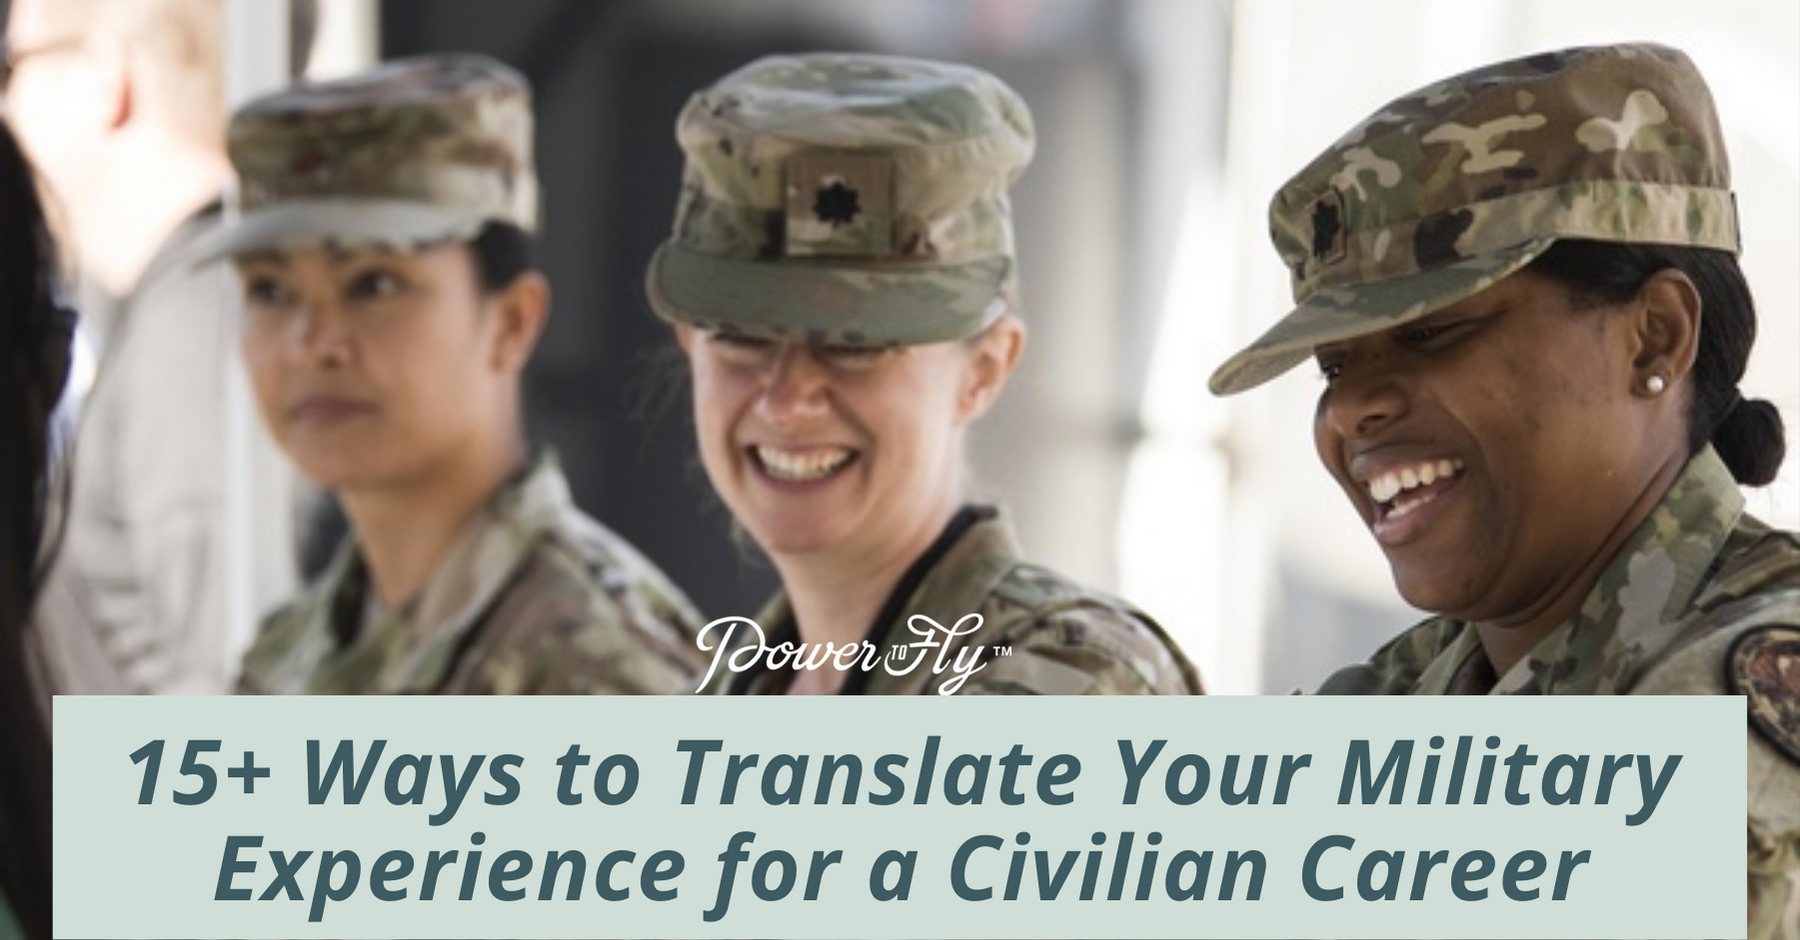 15+ Ways to Translate Your Military Experience for a Civilian Career